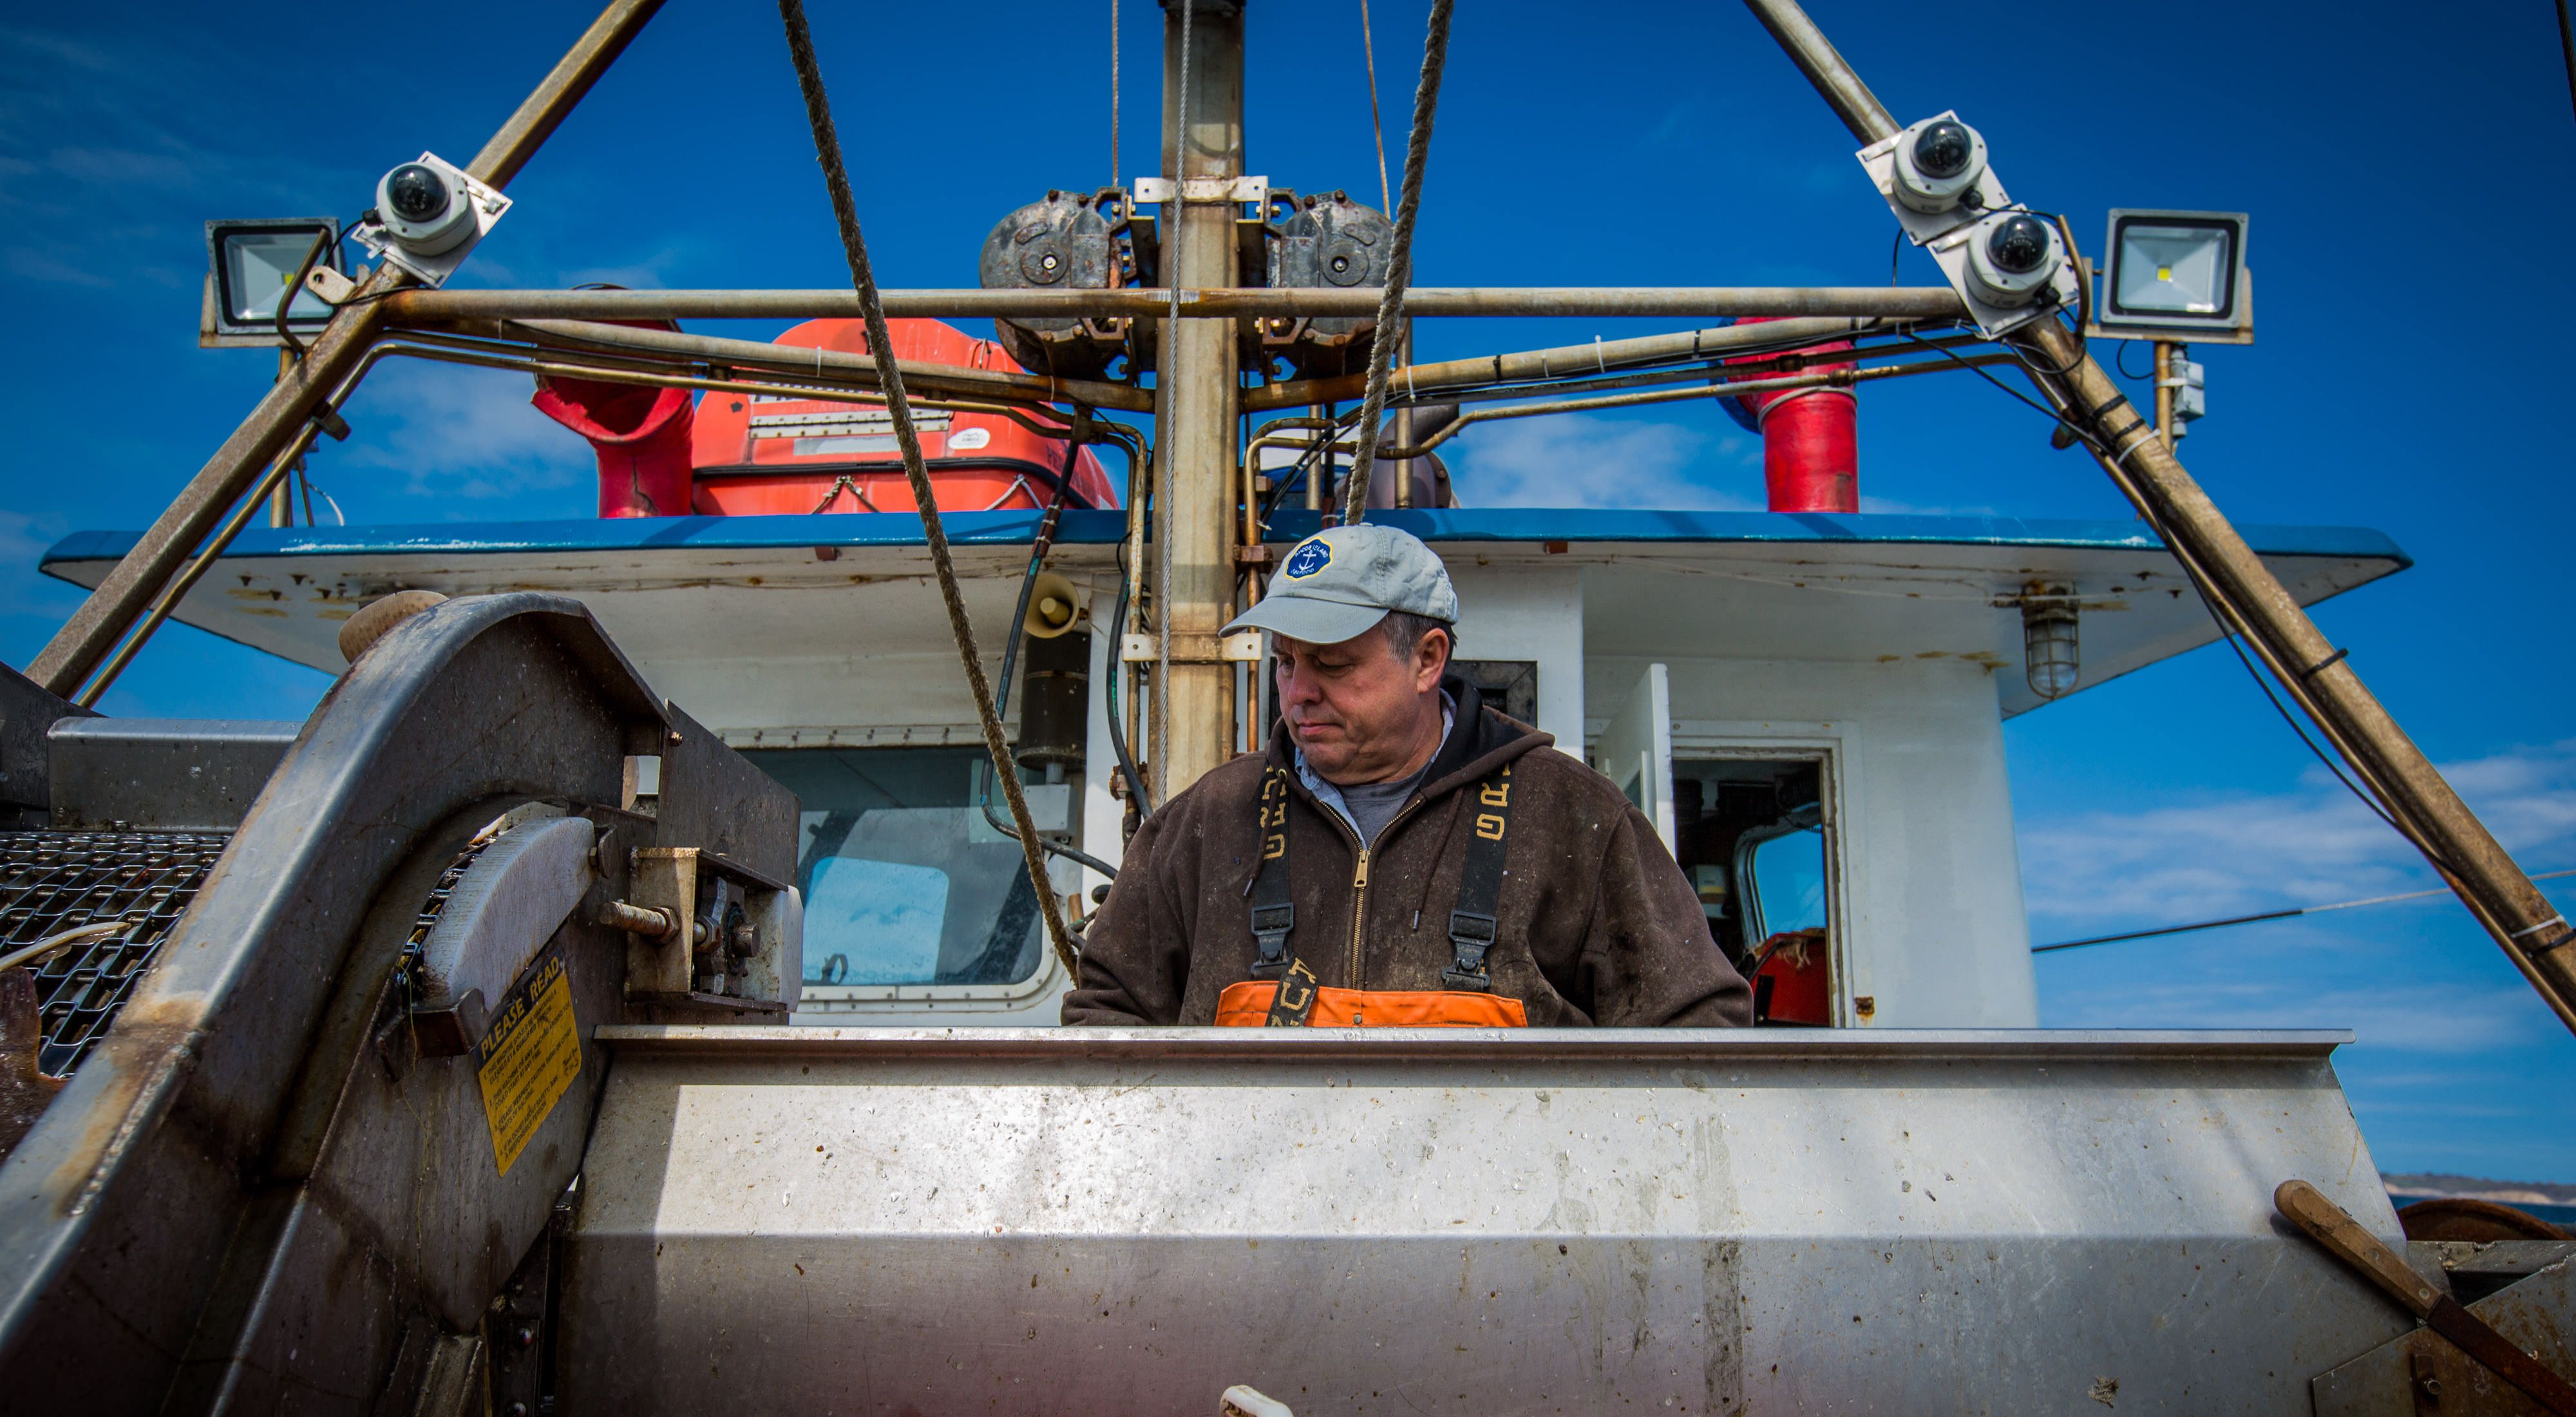 Christopher Brown, who captains the Proud Mary based out of Rhode Island, sorts fish as electronic monitoring cameras are visible behind him.